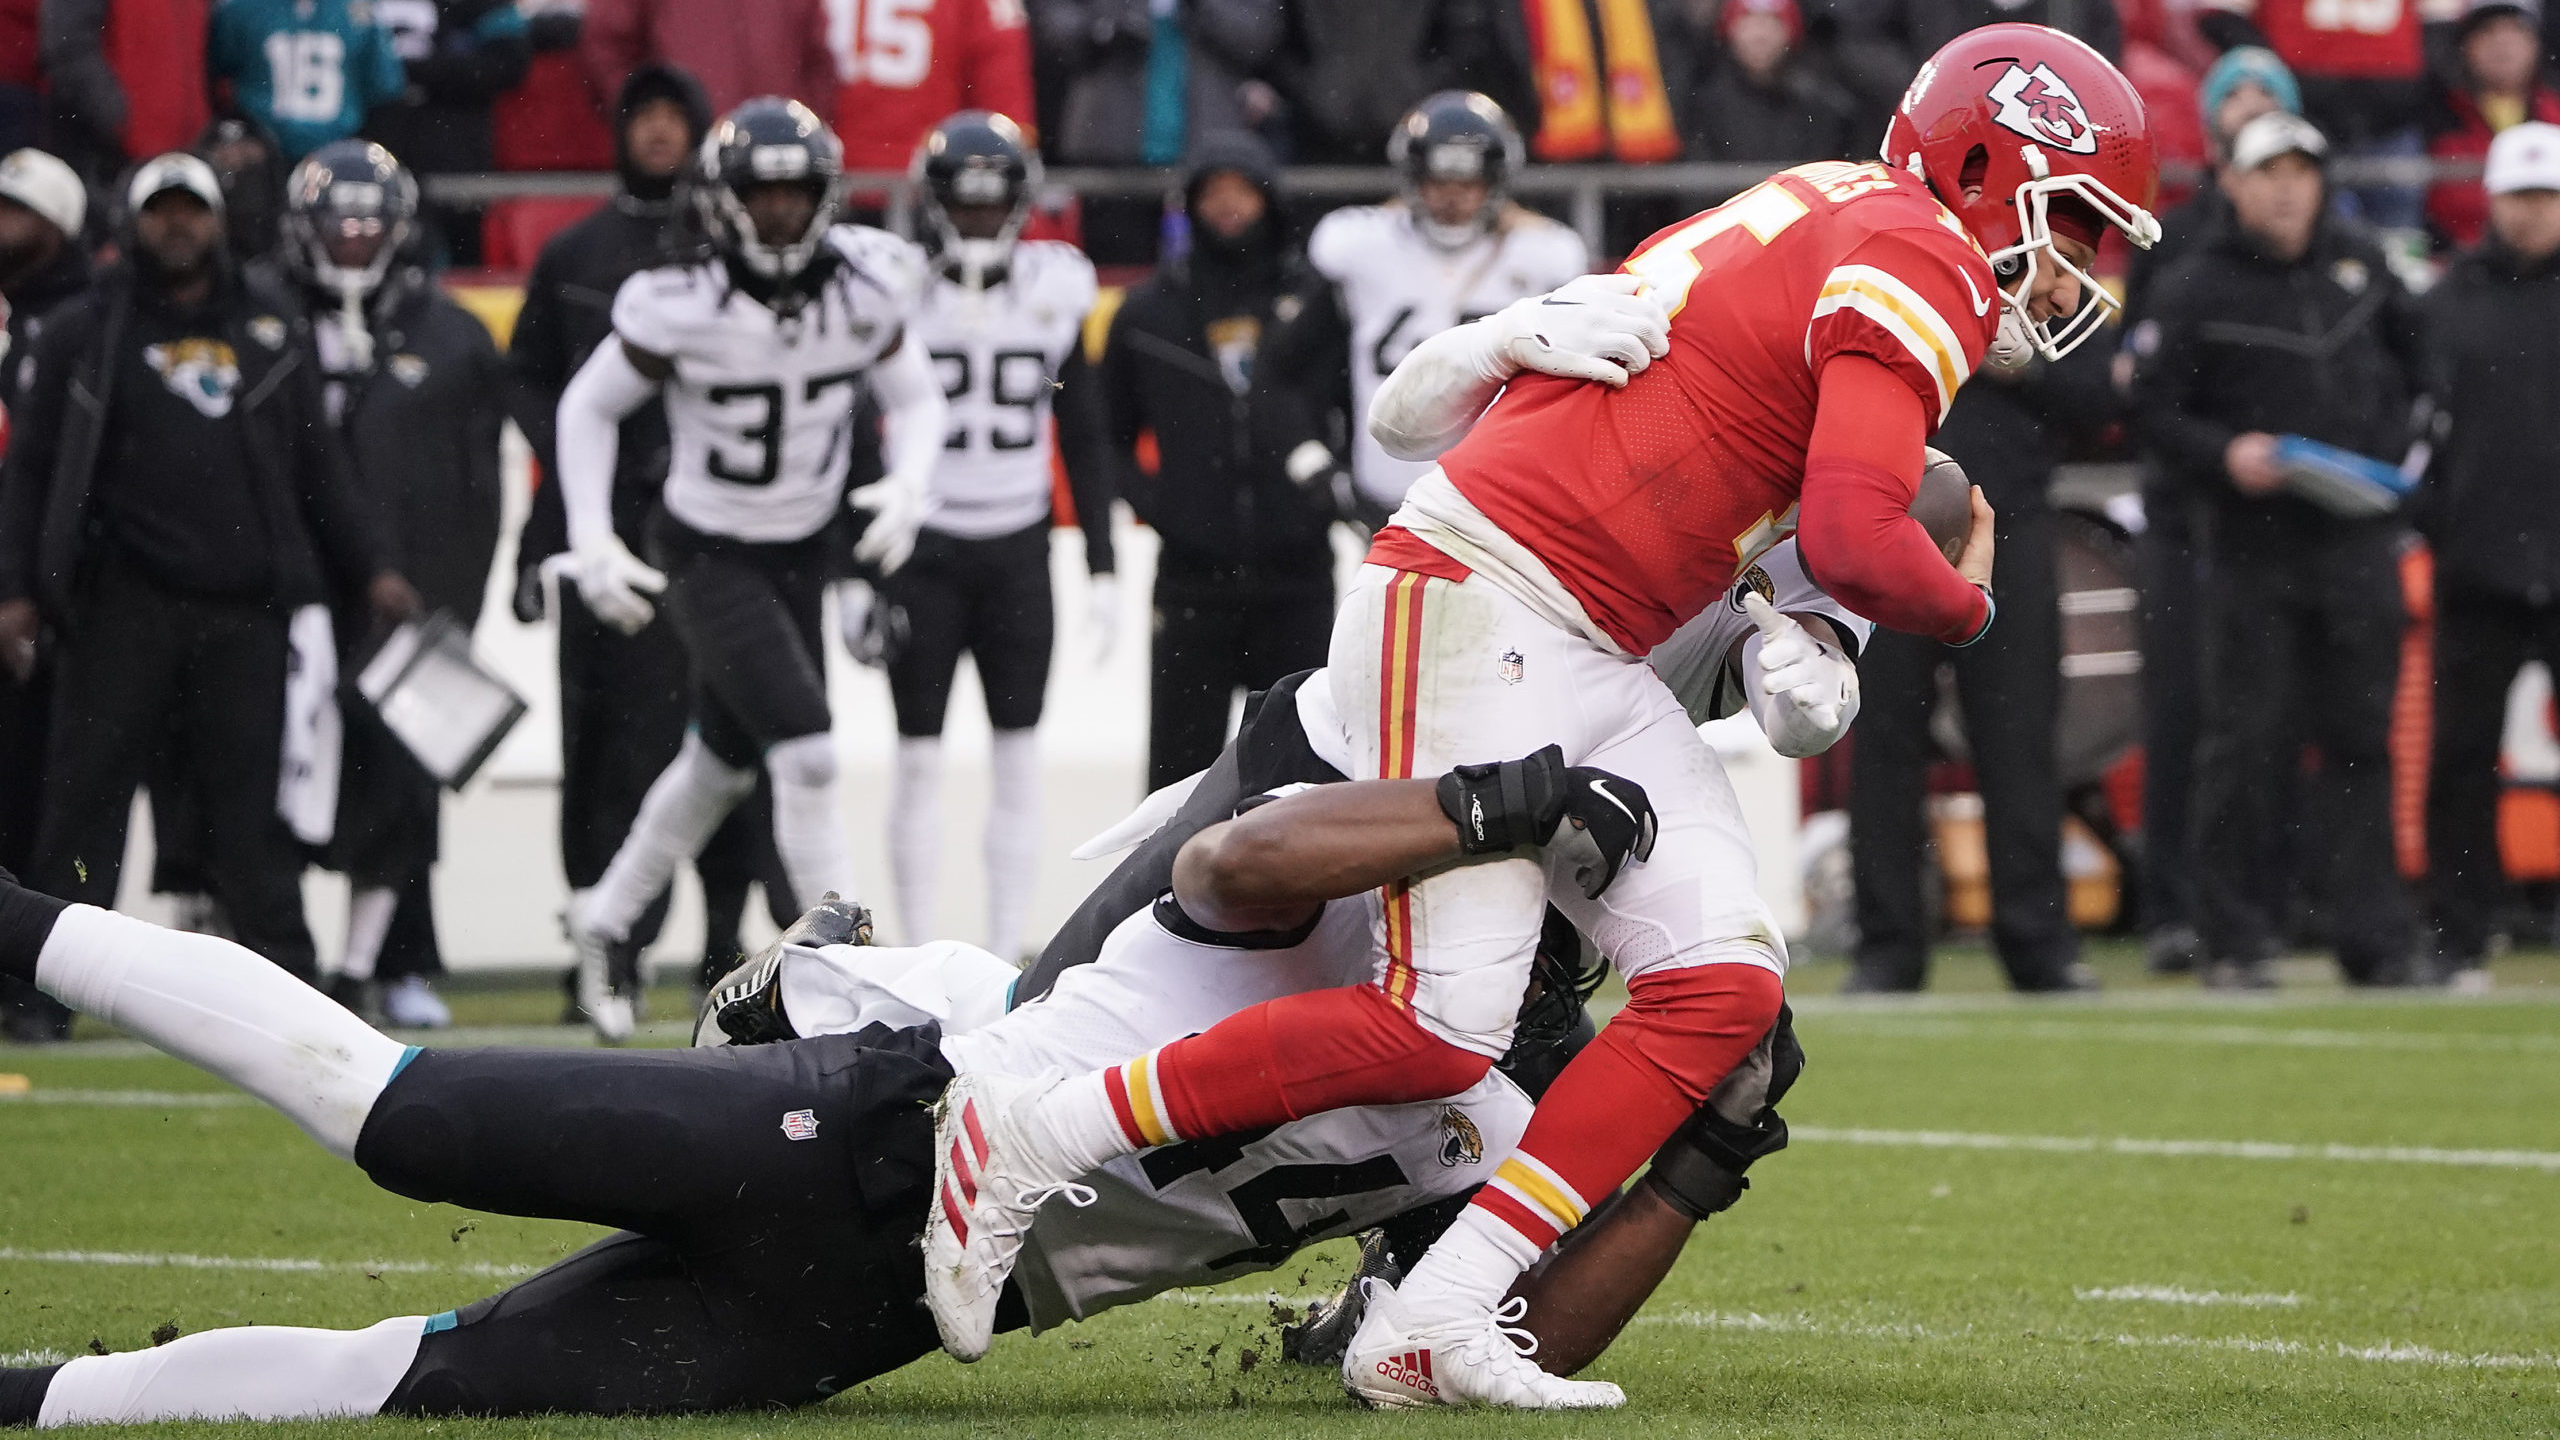 Staying Off Injured Ankle Imperative for Mahomes’ Recovery